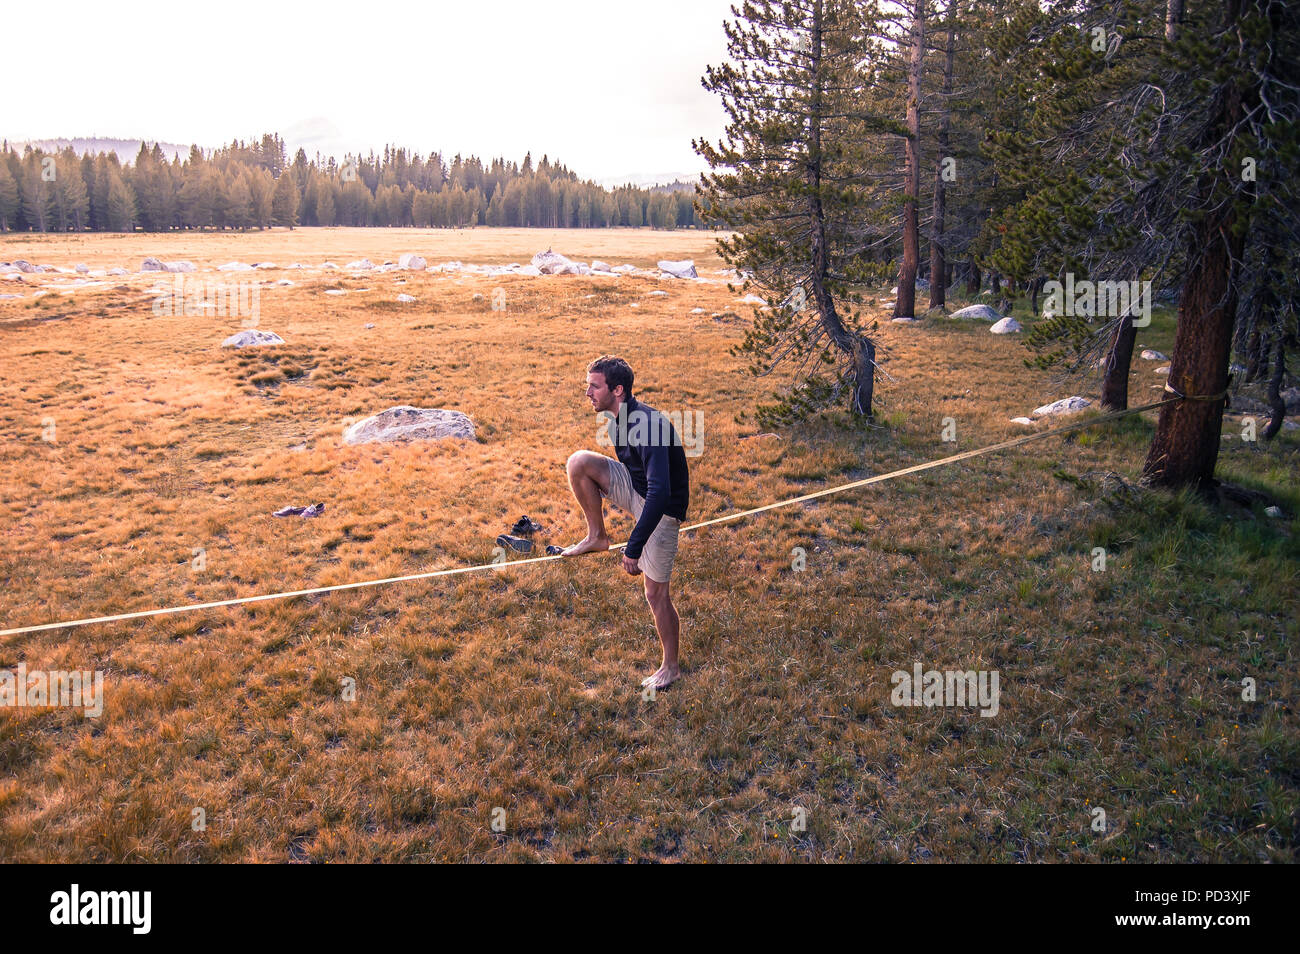 Young man practicing on slack line, Tuolumne Meadows, upper part of the Yosemite National Park, California, USA Stock Photo